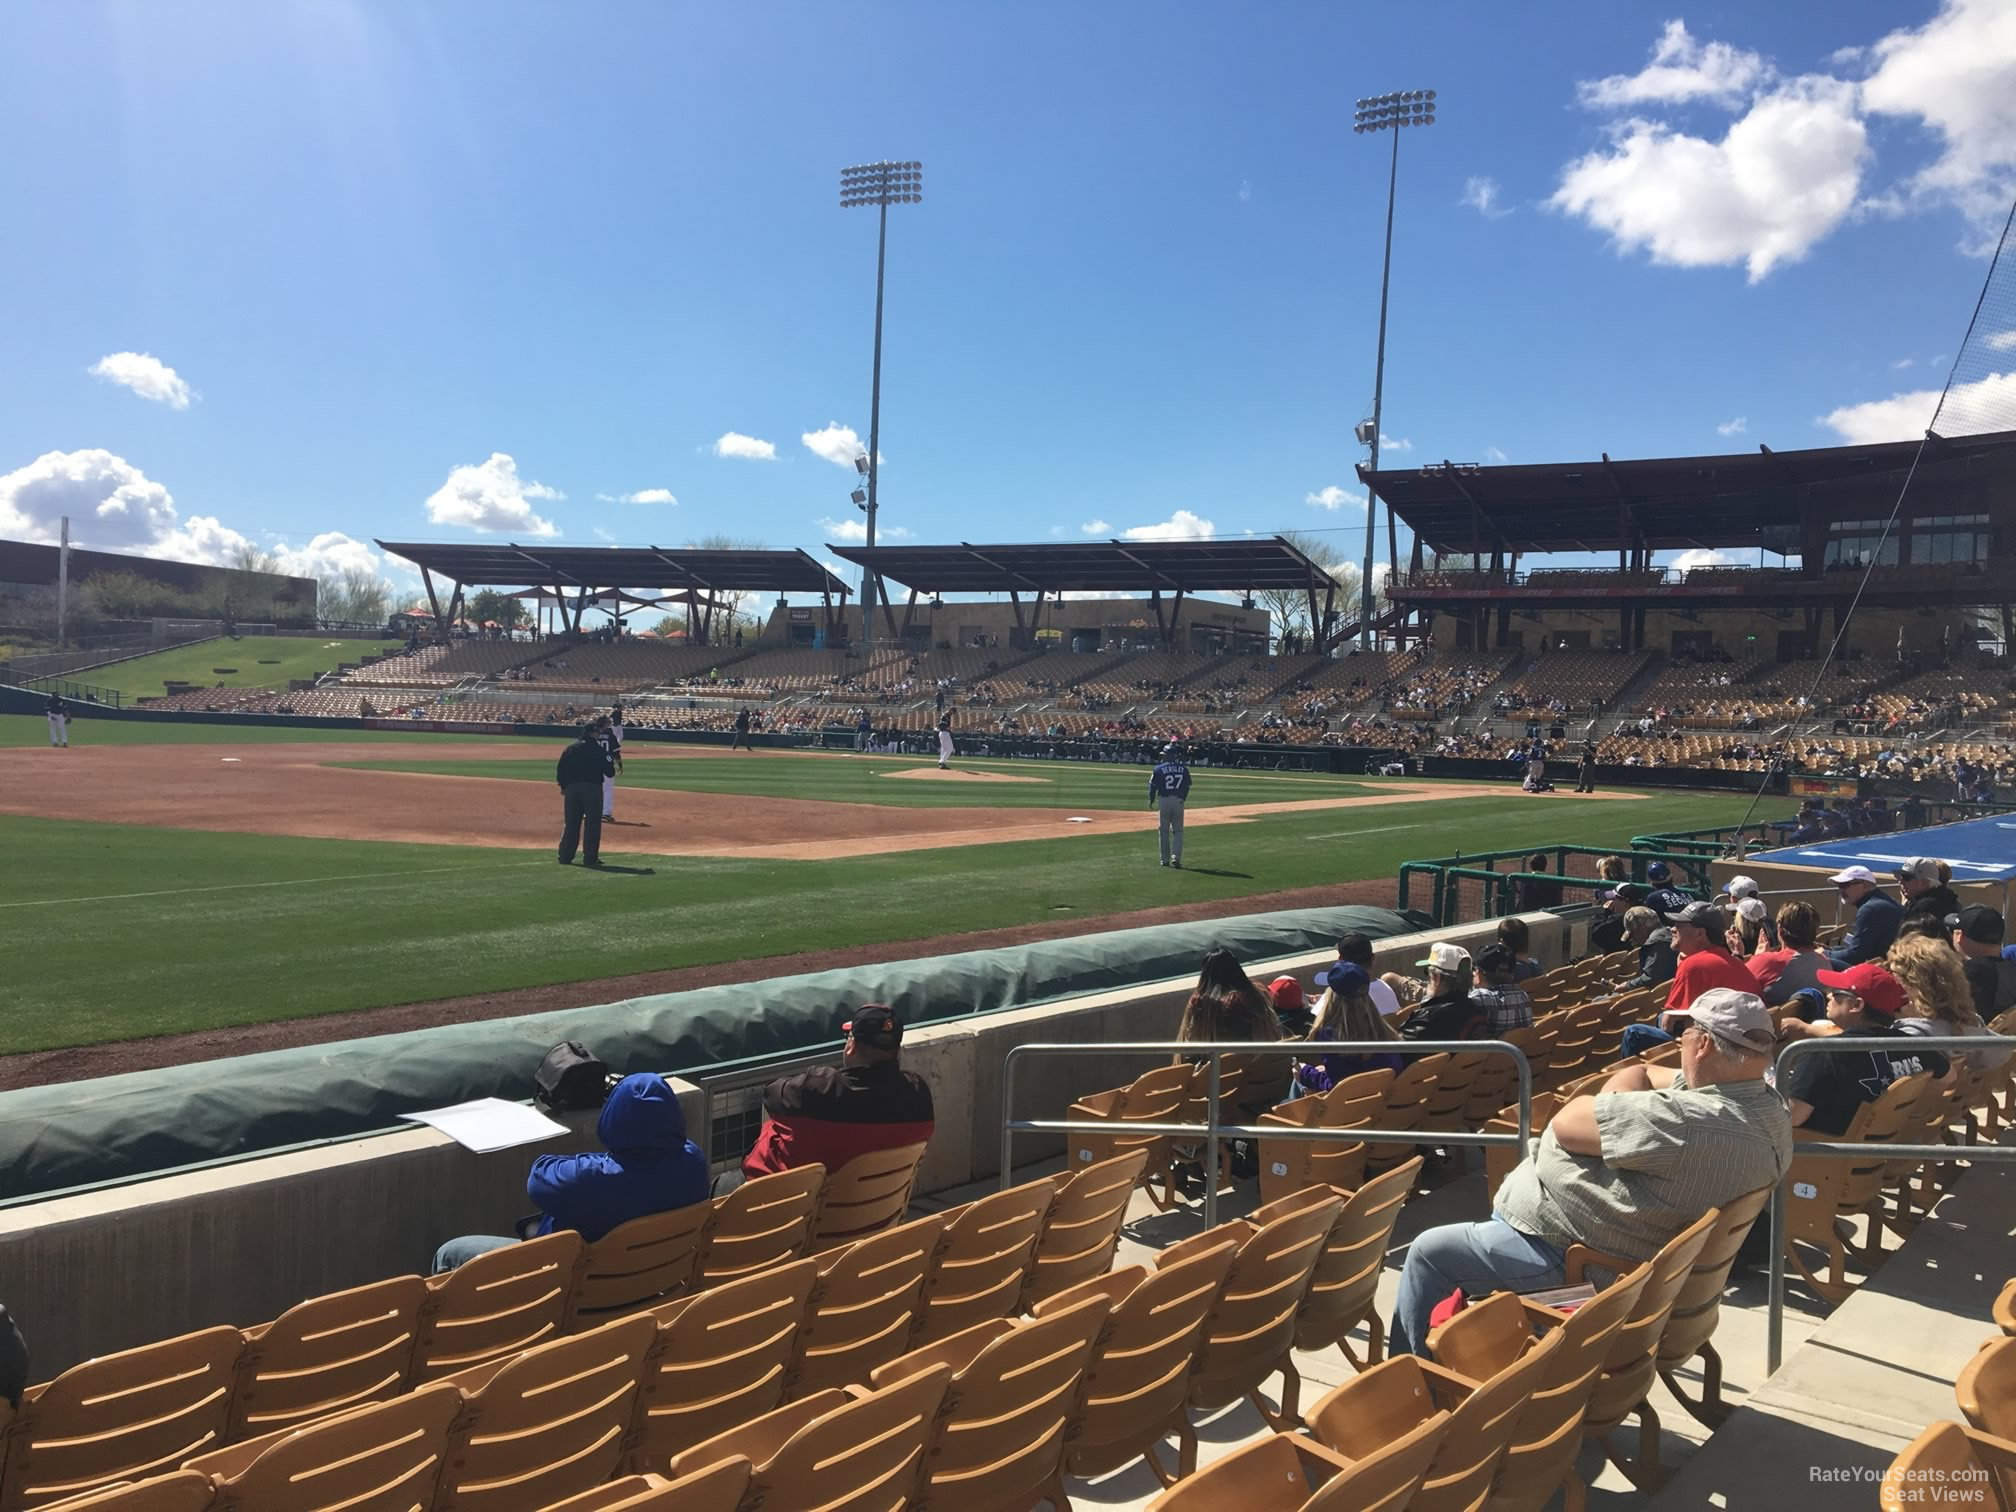 section 26, row 6 seat view  - camelback ranch